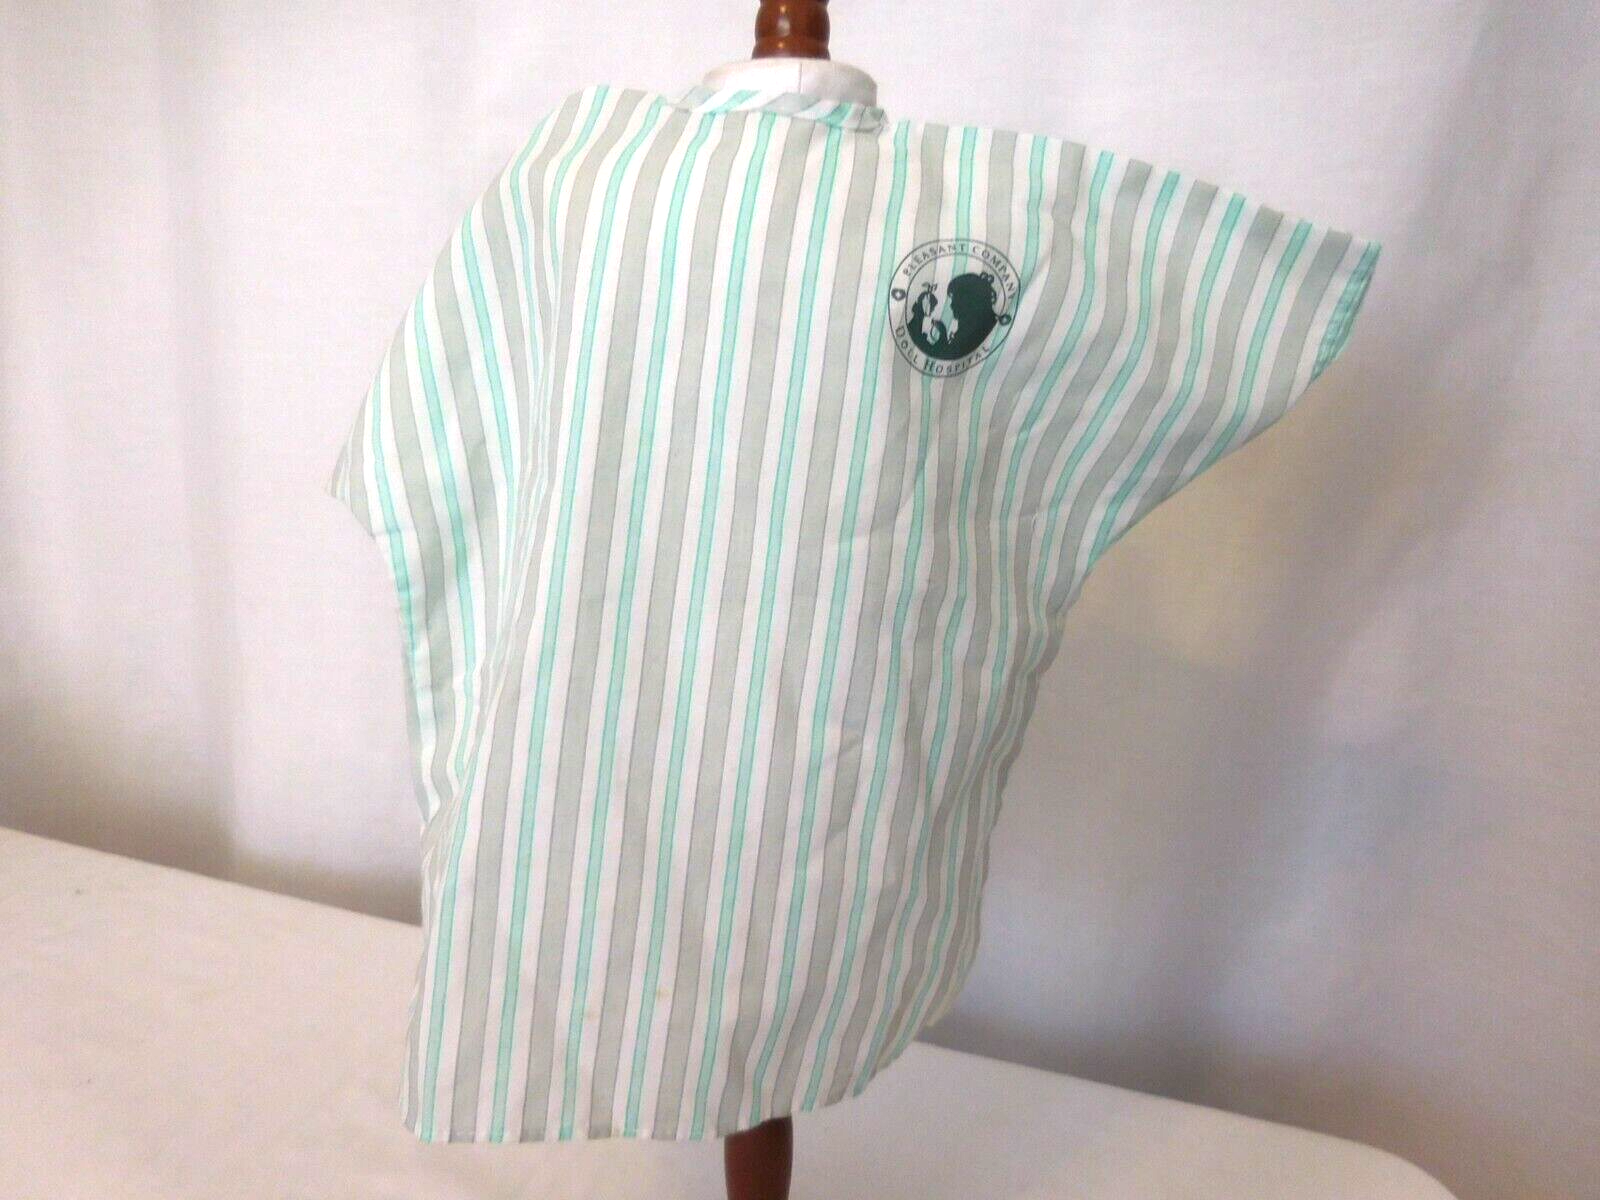 Pleasant Company American Girl Doll Hospital Gown Retired Vintage HTF - $9.90